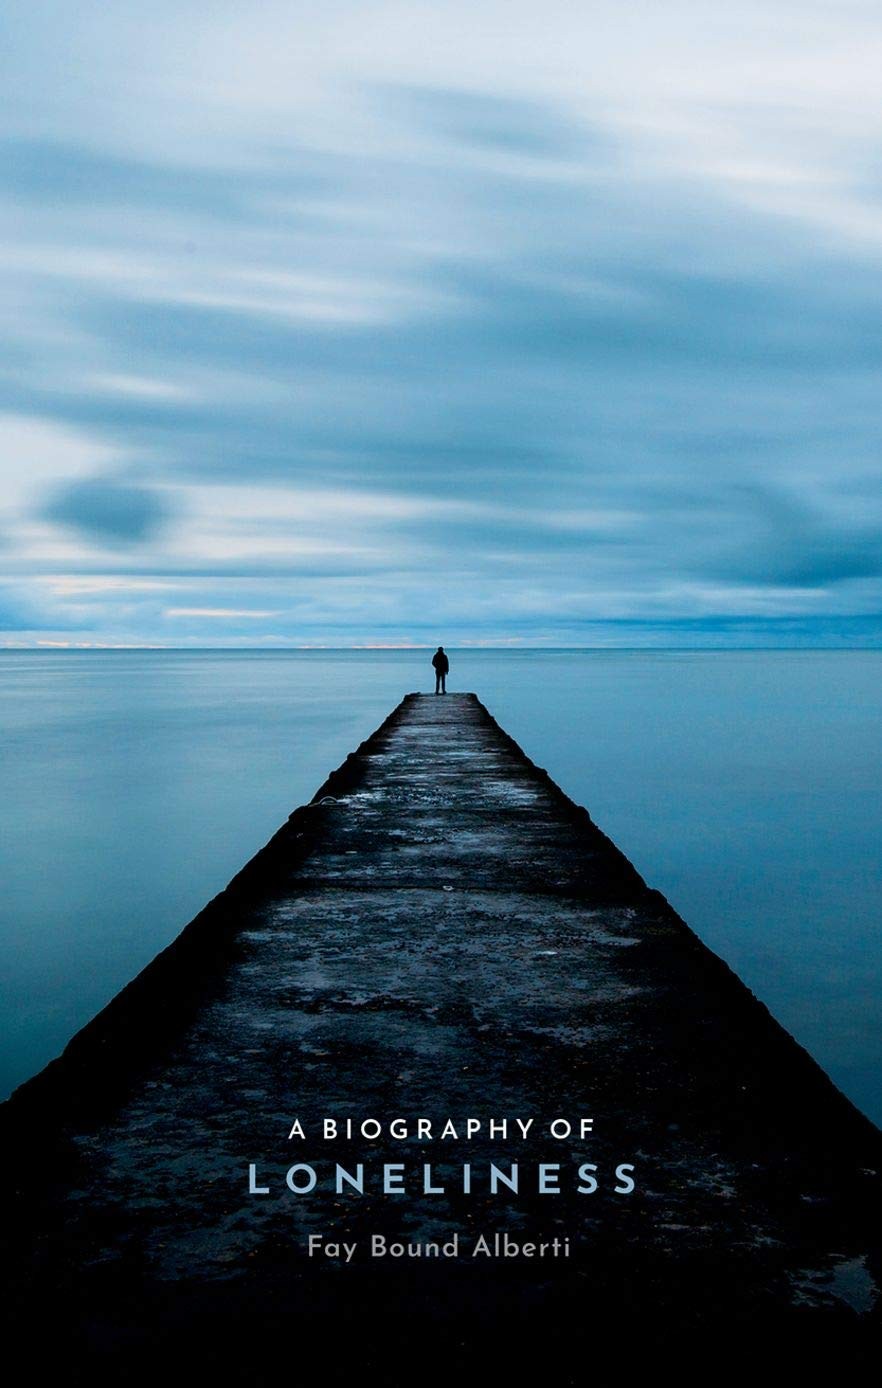 A Biography of Loneliness: The History of an Emotion